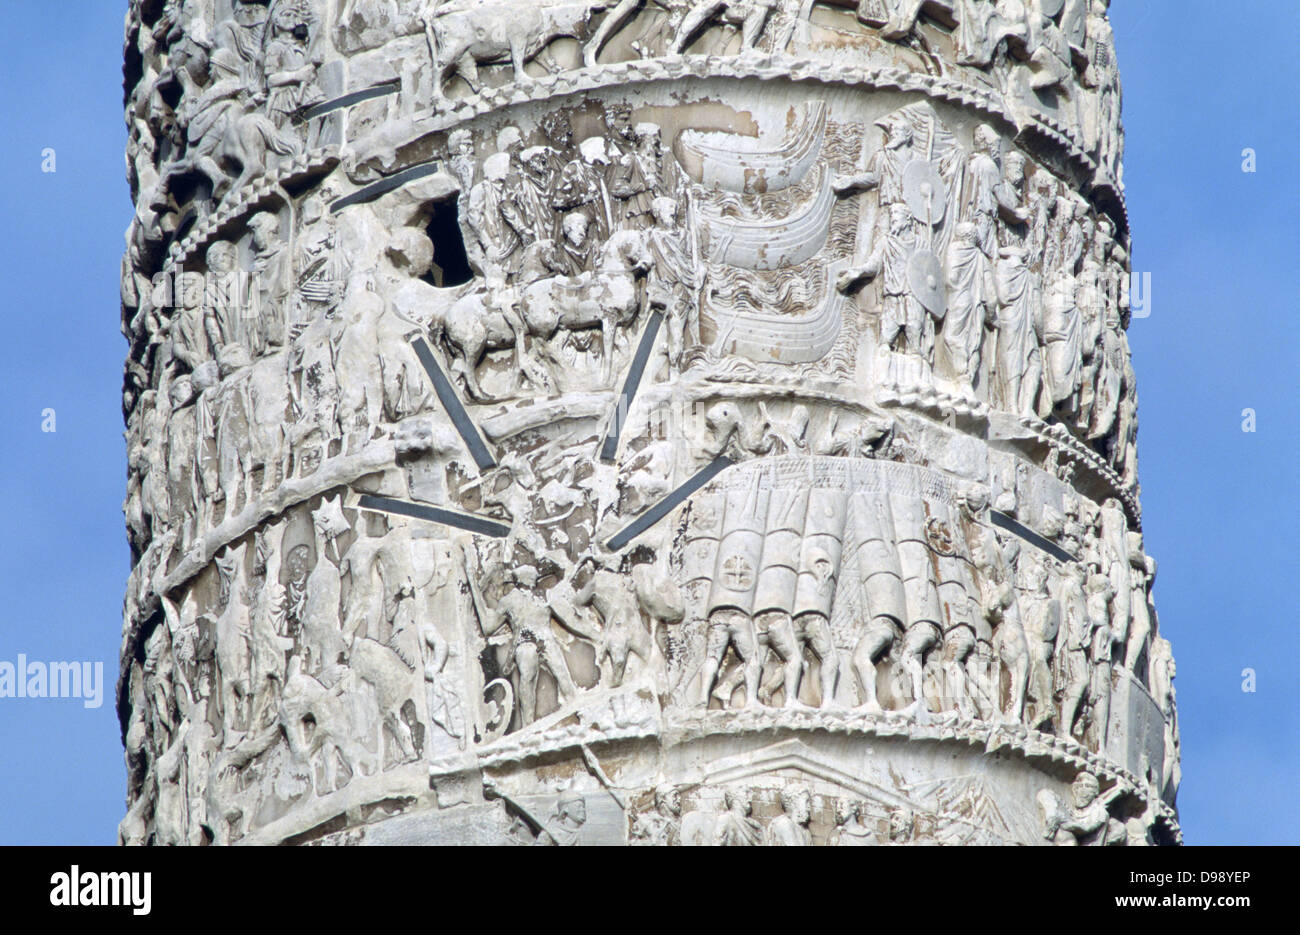 Trajan's Column, Rome, completed in 113. Column celebrating Emperor Trajan's victories in the Dacian wars with incidents in the campaign carved in low relief. Straps holding the fabric together are visible. Ancient Roman Stock Photo